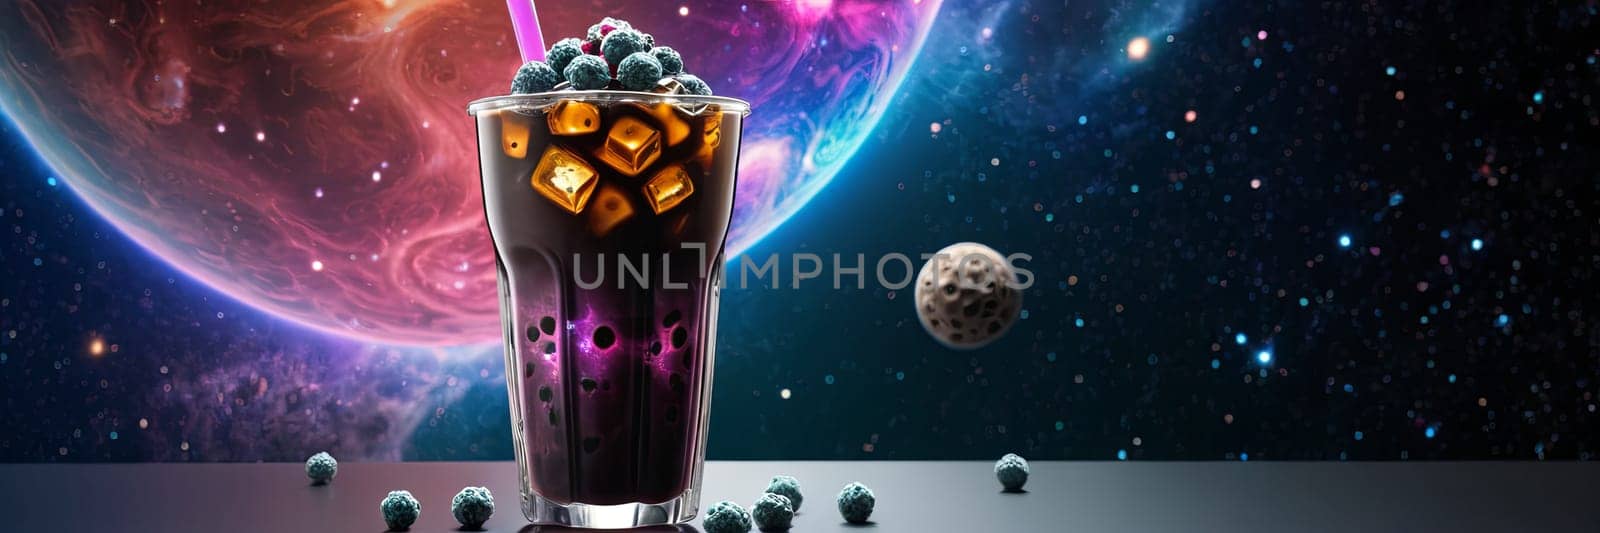 Bubble tea with black pearls and cream, foreground. Background displays a vibrant galaxy adorned with stars and nebulae. by Matiunina